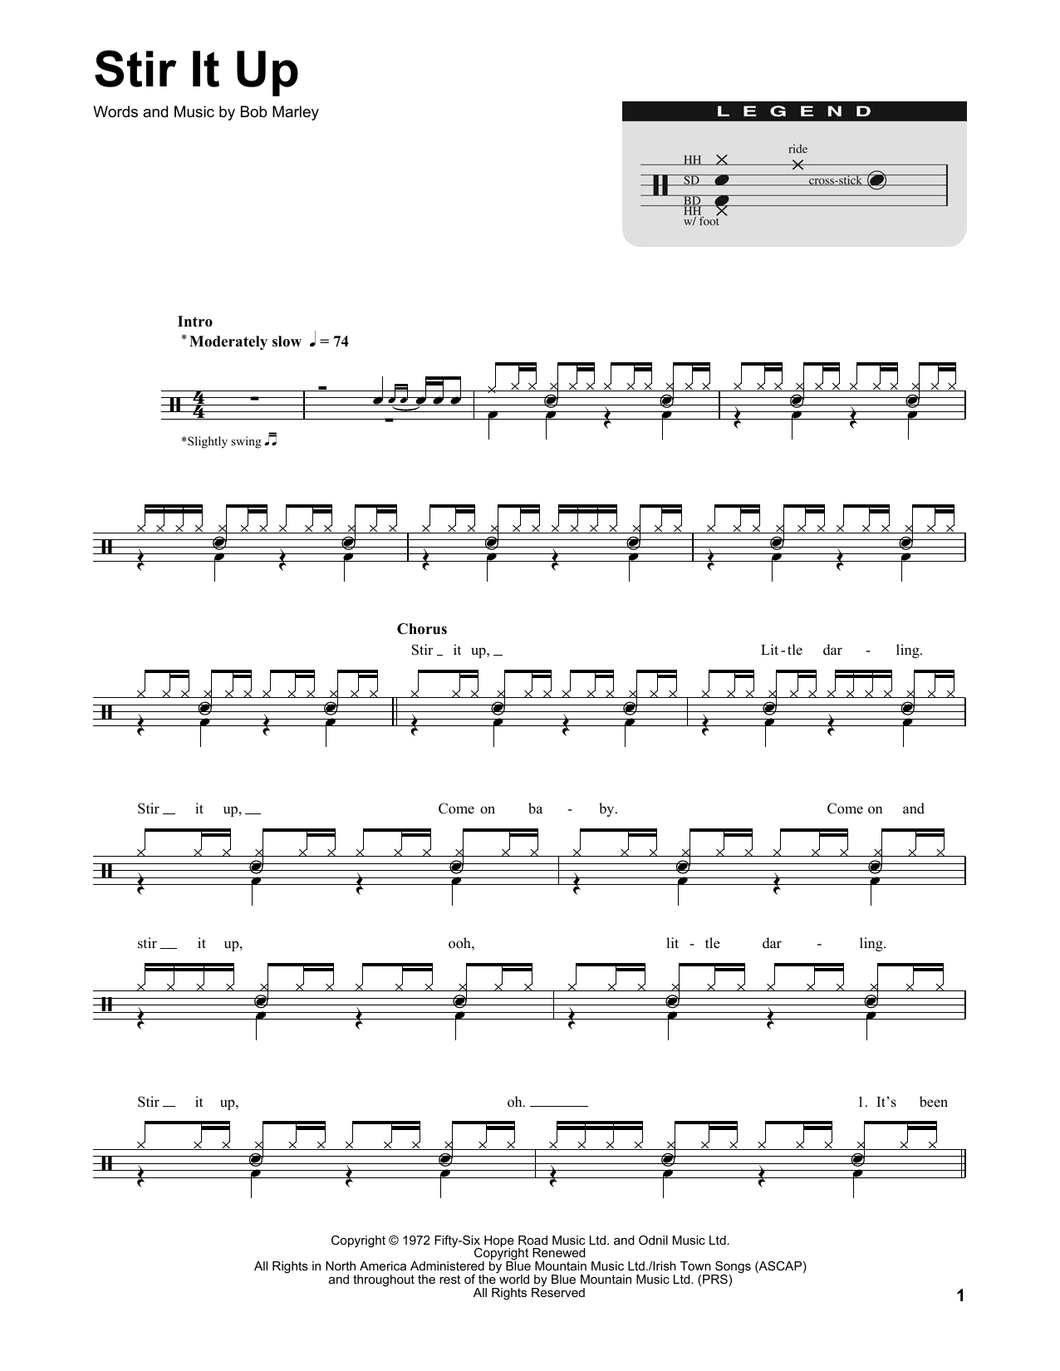 Stir It Up - Bob Marley & The Wailers - Full Drum Transcription / Drum Sheet Music - SheetMusicDirect DT175145